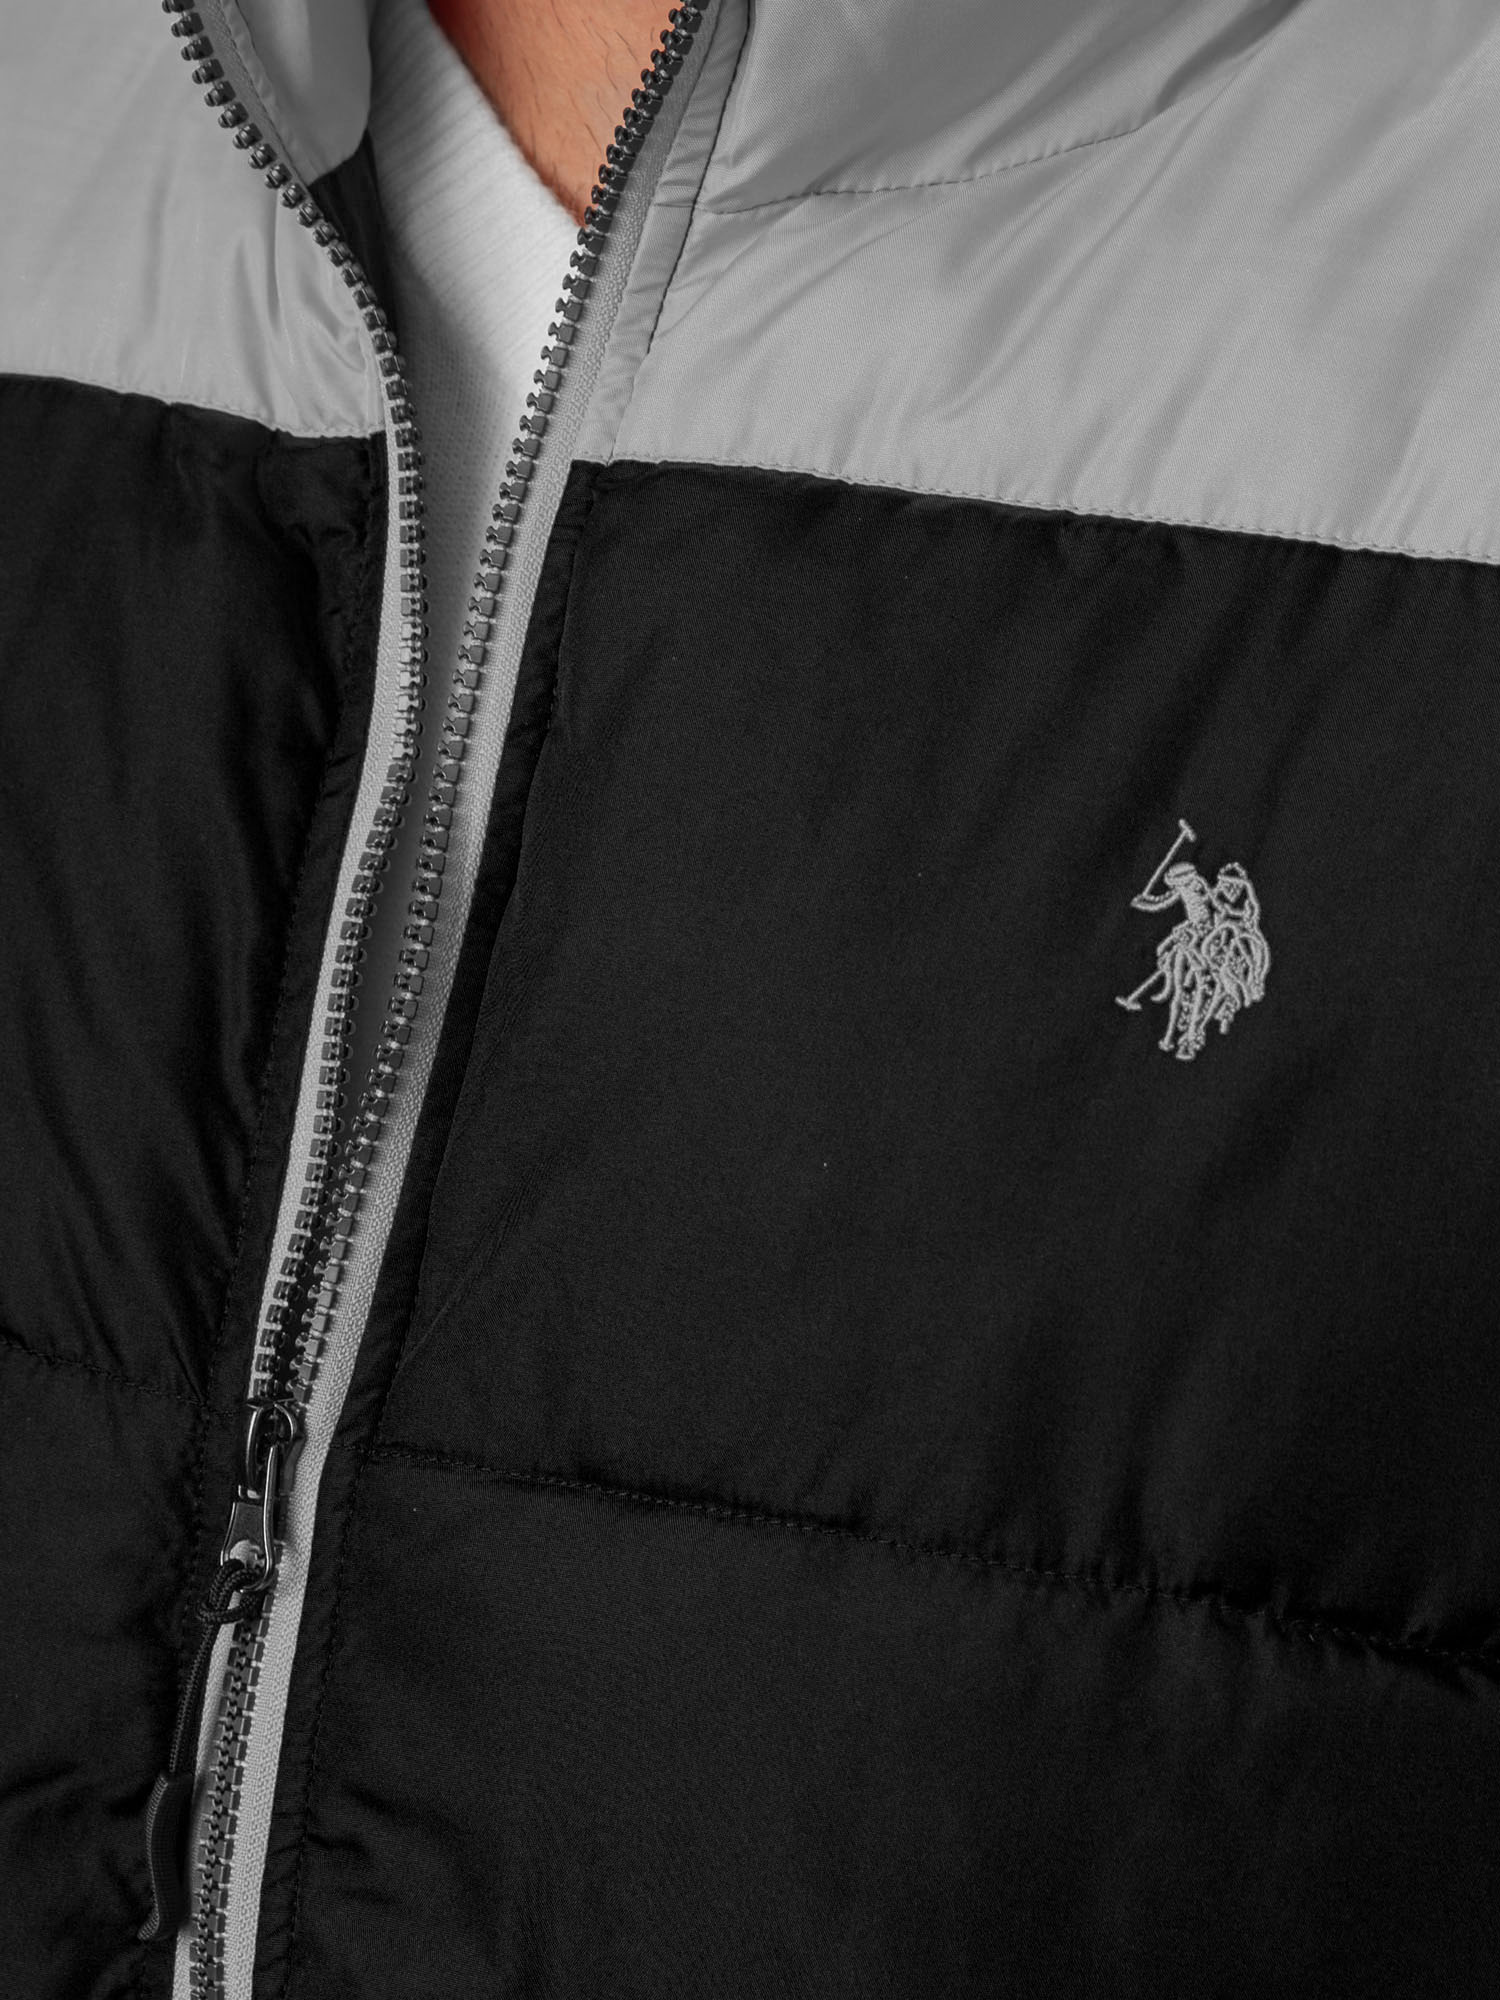 U.S. Polo Assn. Puffer Vest - image 5 of 5